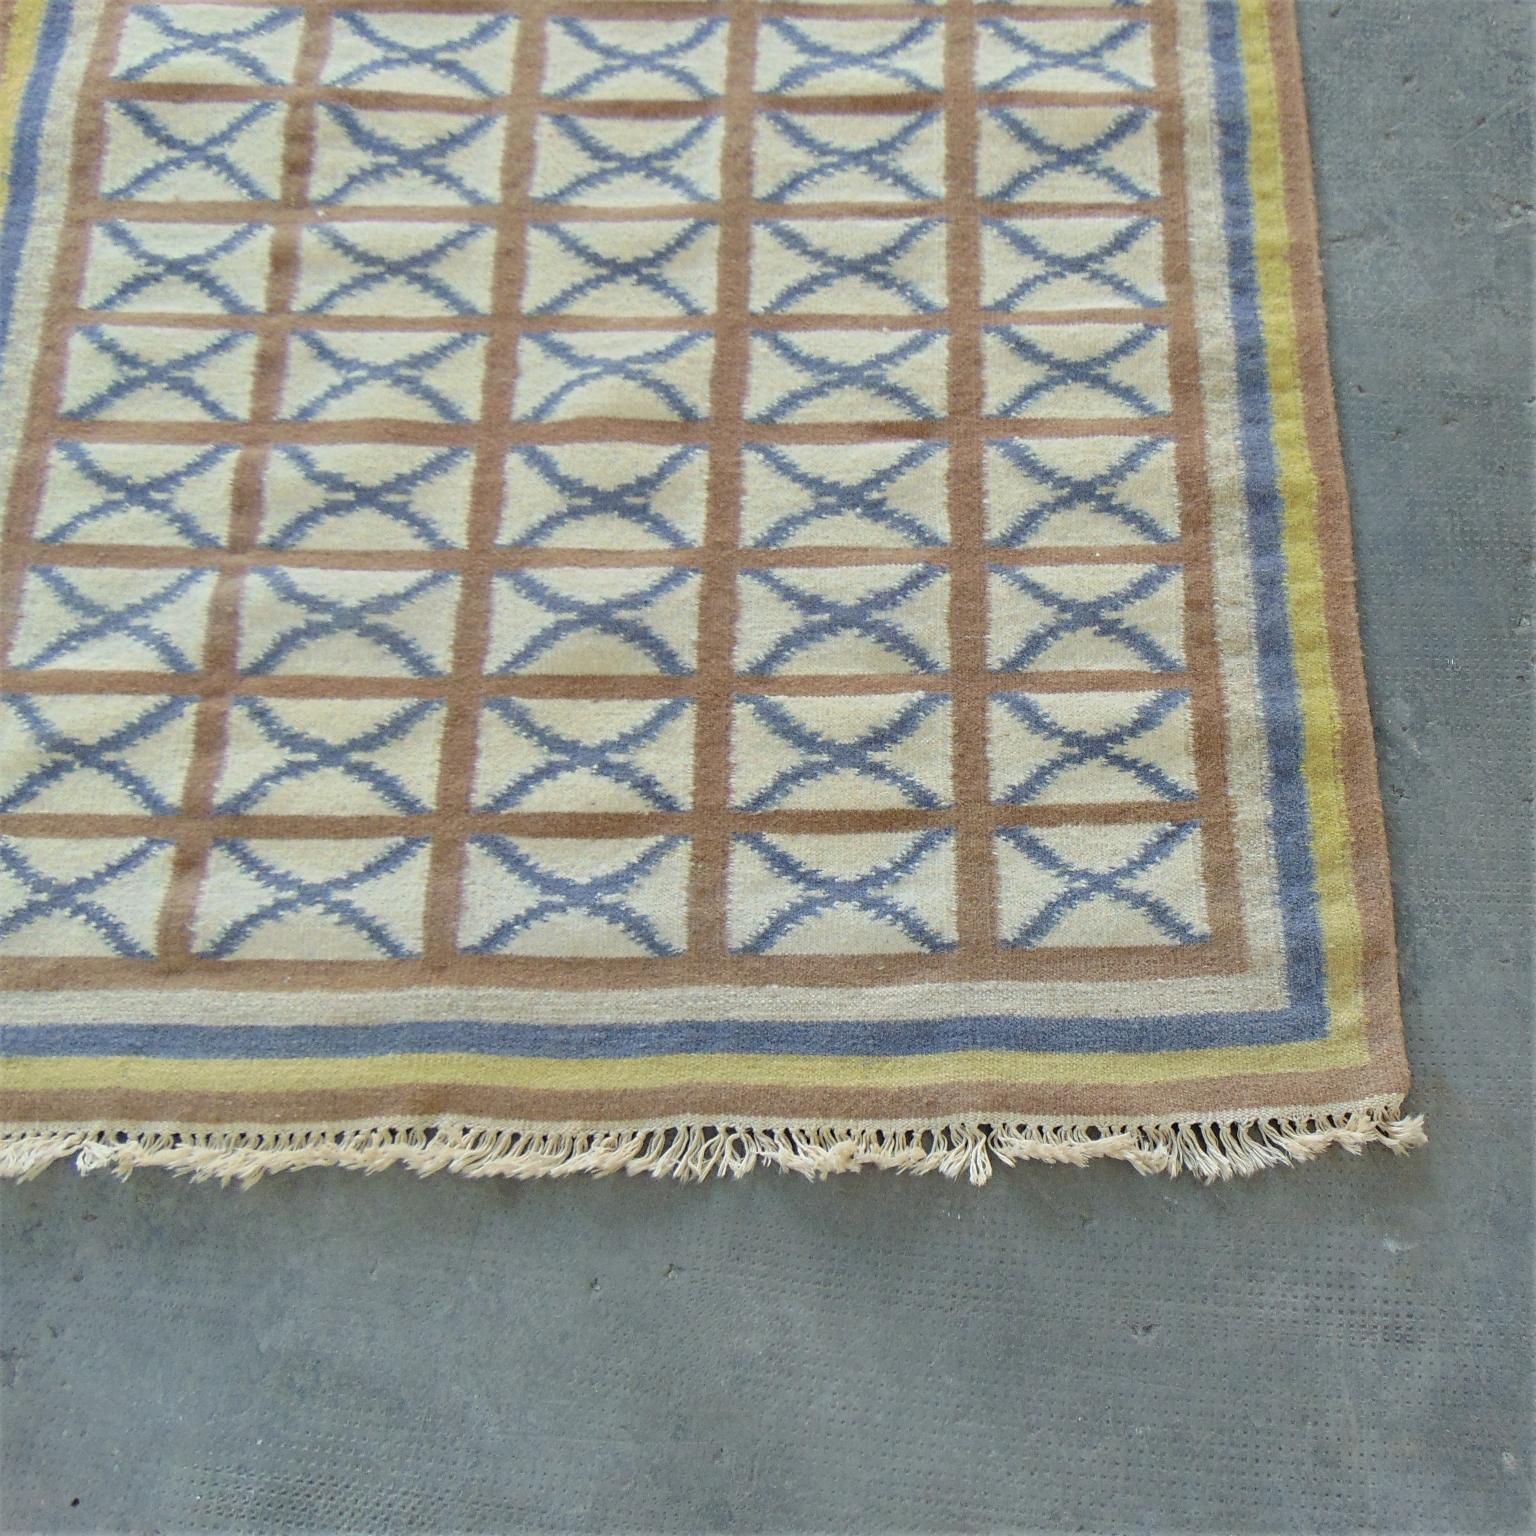 Wool 1975 Handwoven Kilim Vintage Indian Rug Blue Brown Yellow Ivory Background India For Sale